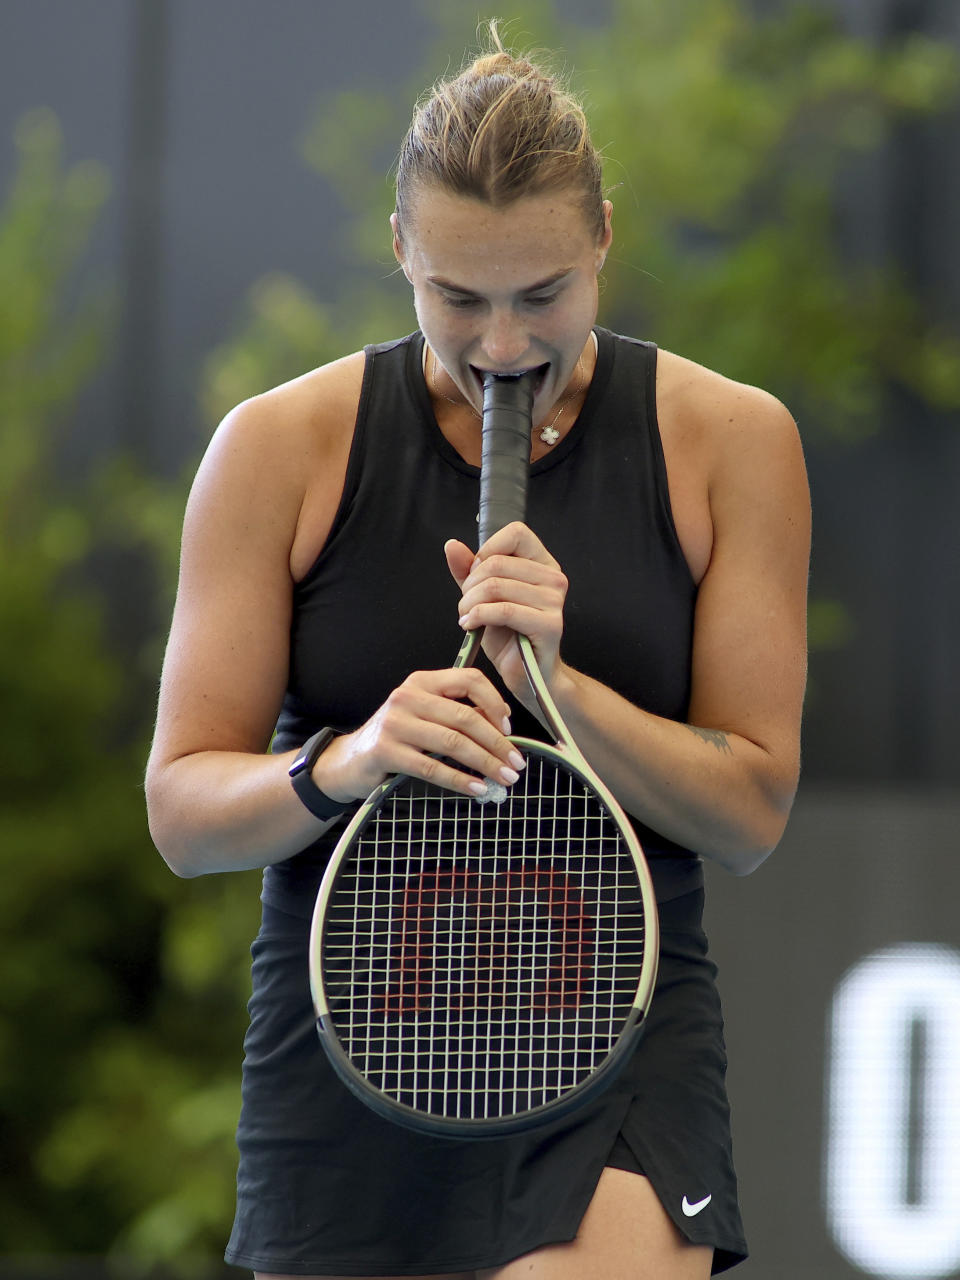 Belarus' Aryna Sabalenka reacts to loosing a point during the final match against Czech Republic's Linda Noskova at the Adelaide International Tennis tournament in Adelaide, Australia, Sunday, Jan. 8, 2023. (AP Photo/Kelly Barnes)